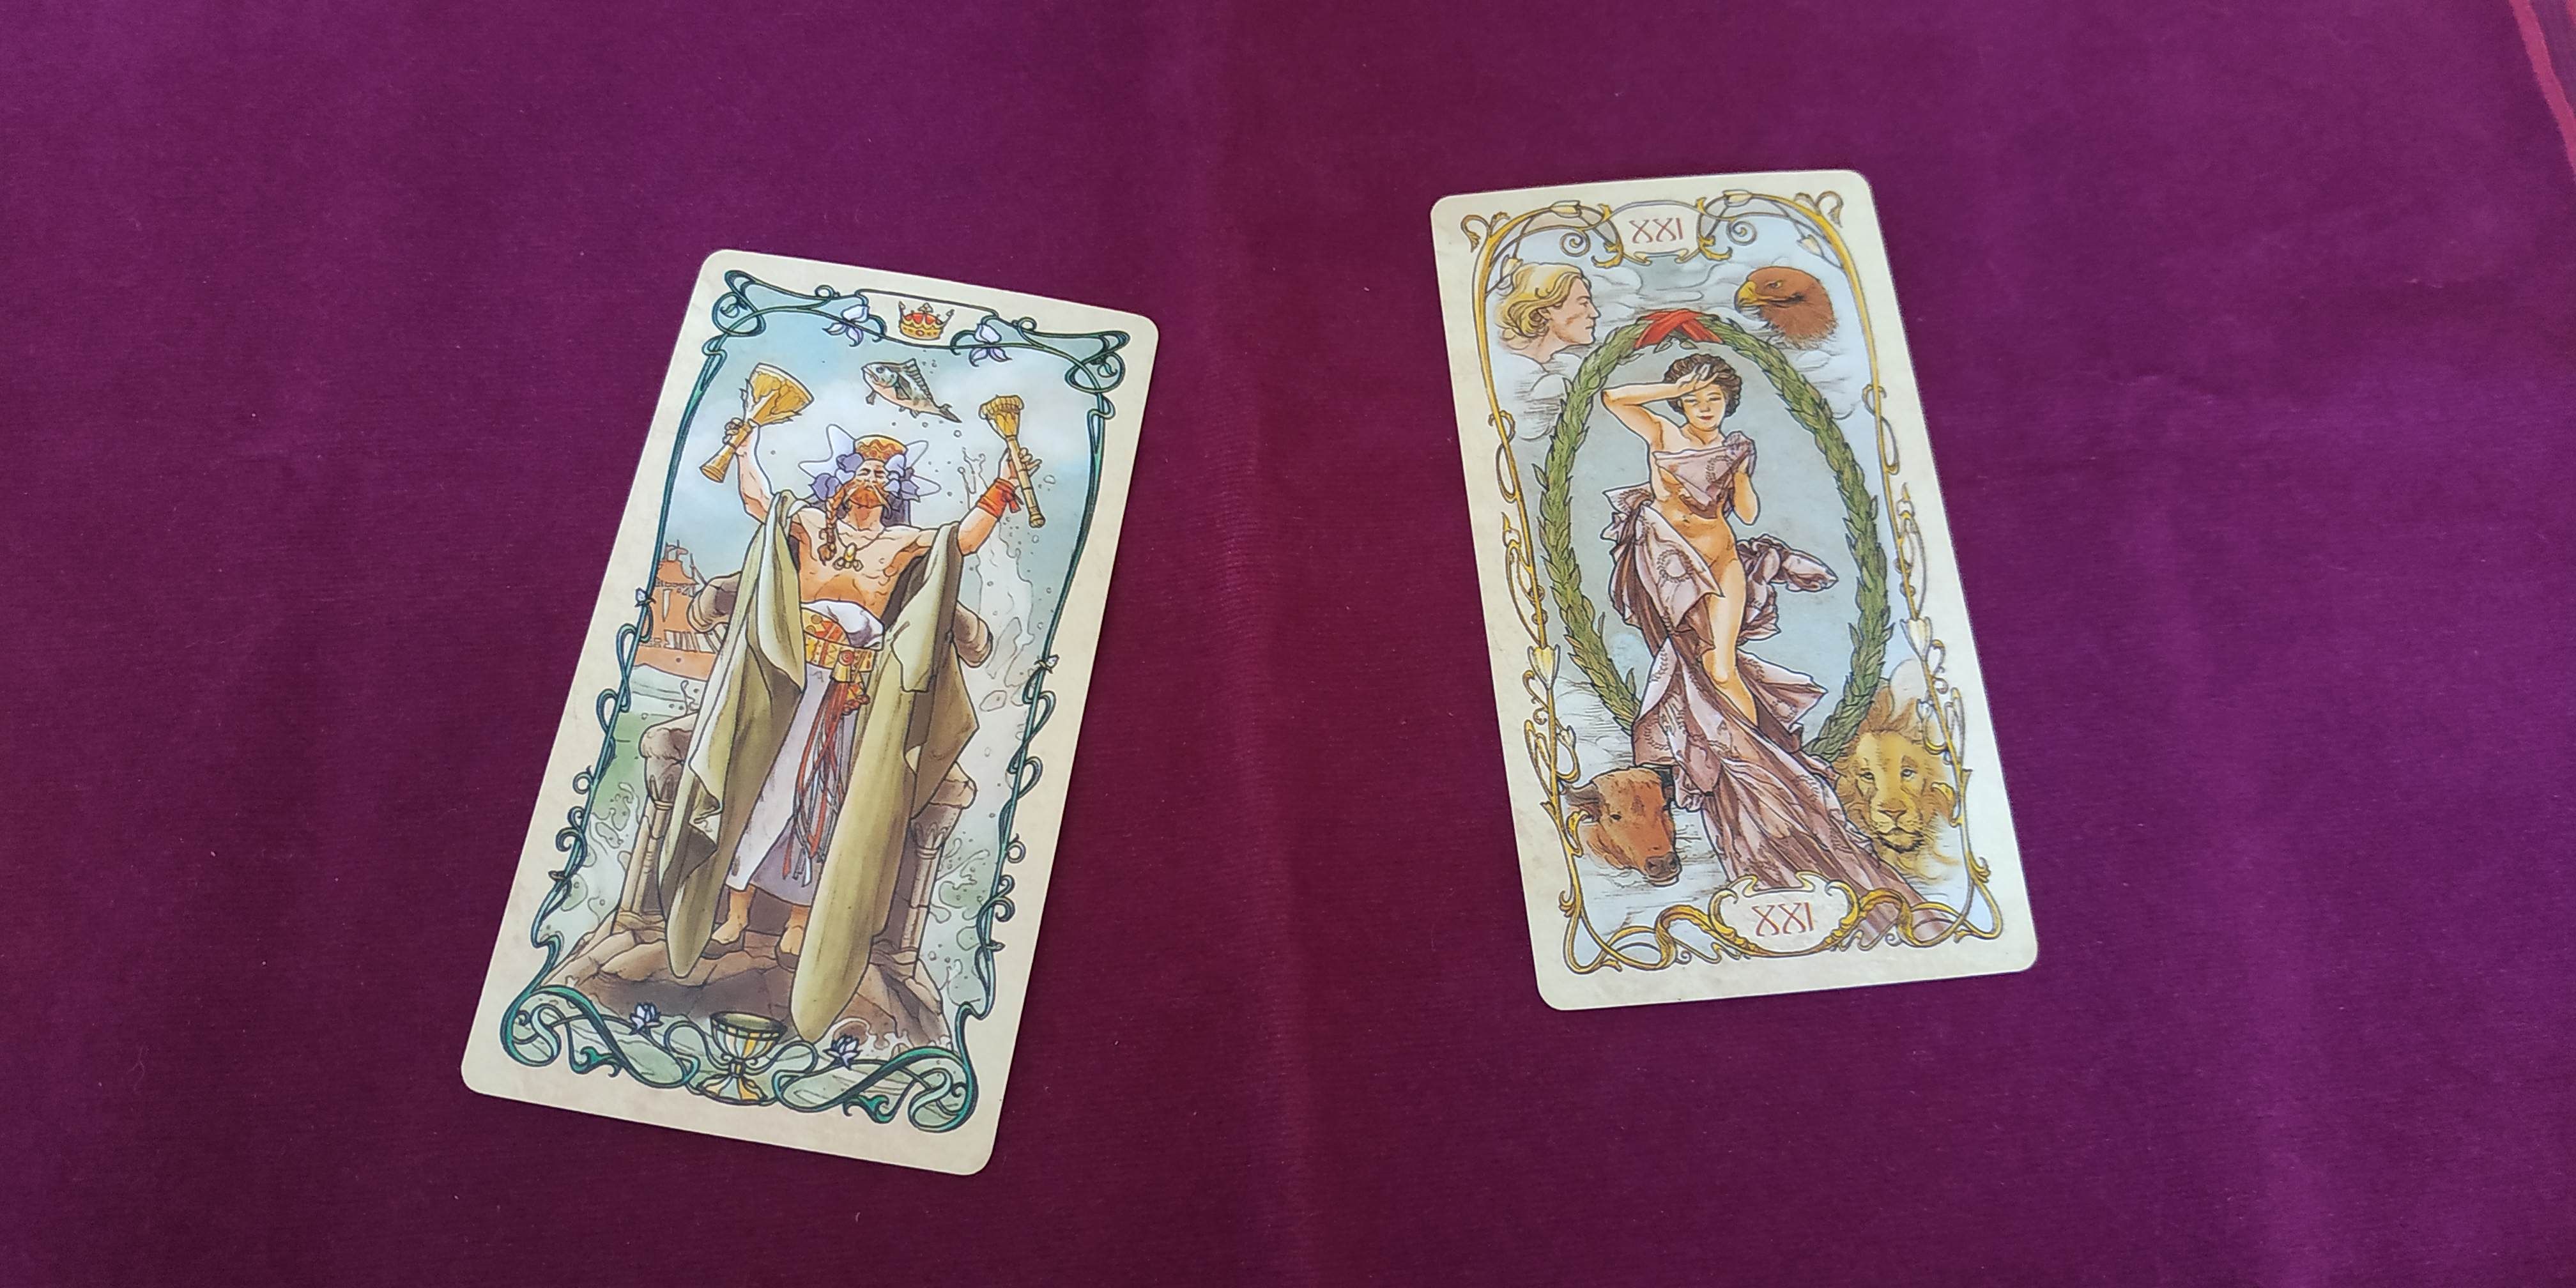 King of Cups and The World